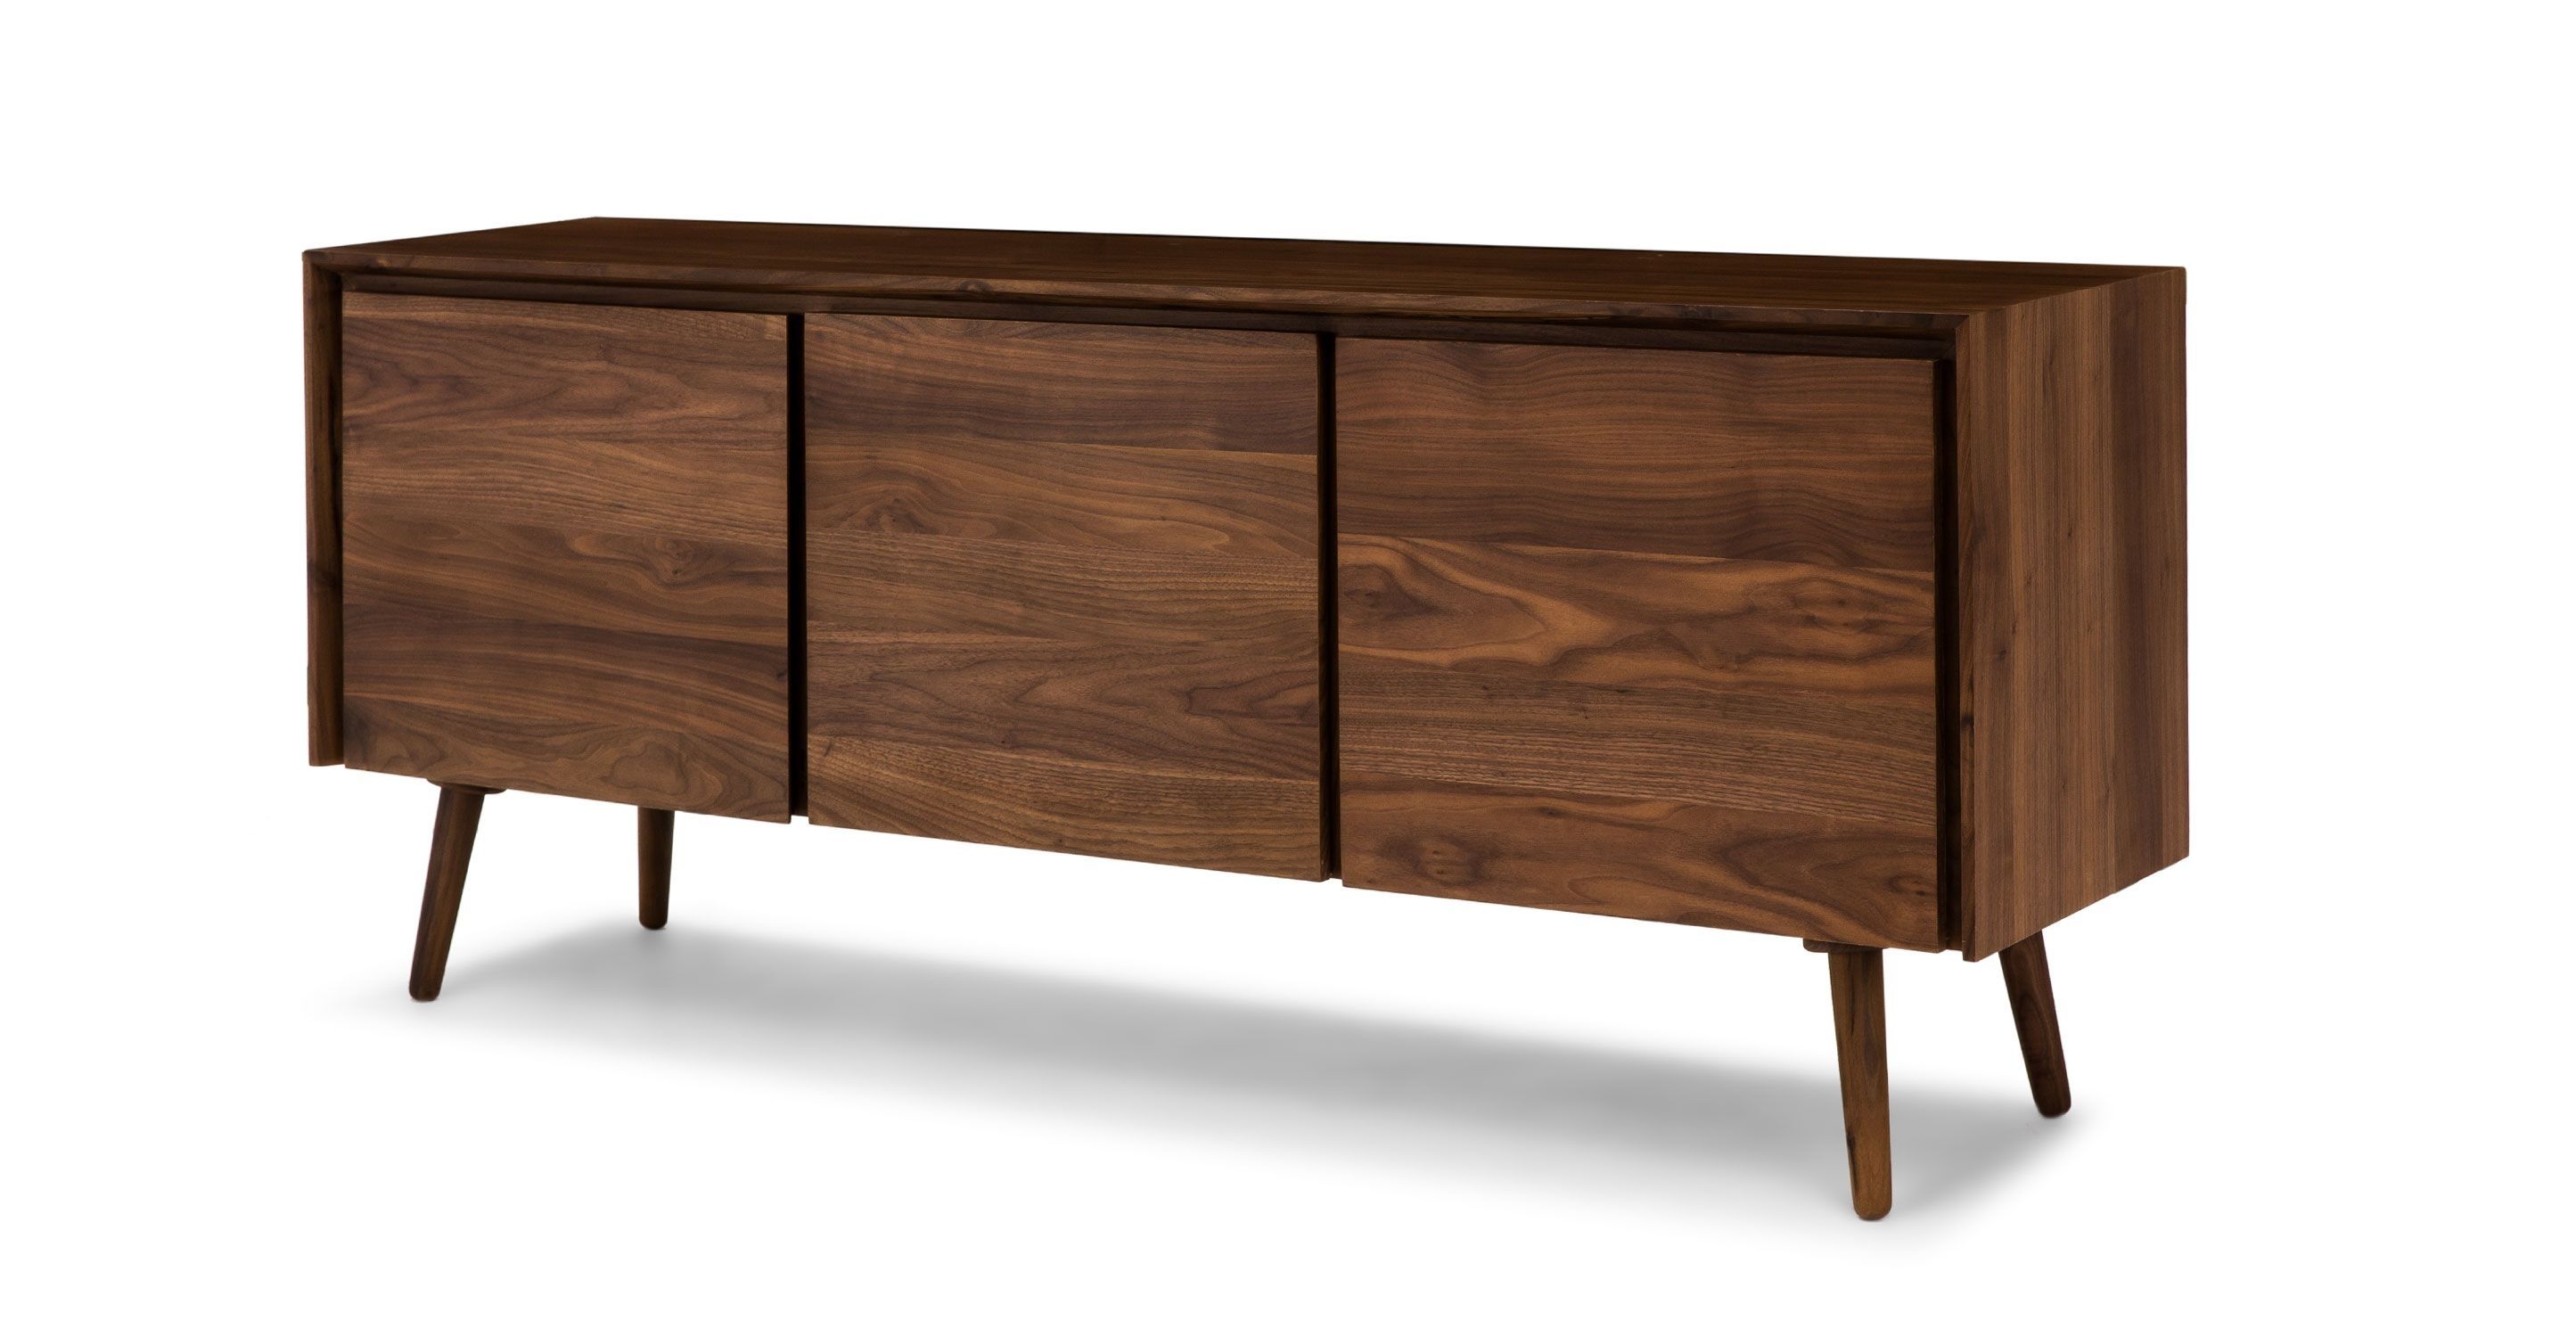 Seno Walnut 71" Sideboard | Window Shopping For The Home | Pinterest With Most Up To Date Lockwood Sideboards (Photo 8 of 20)